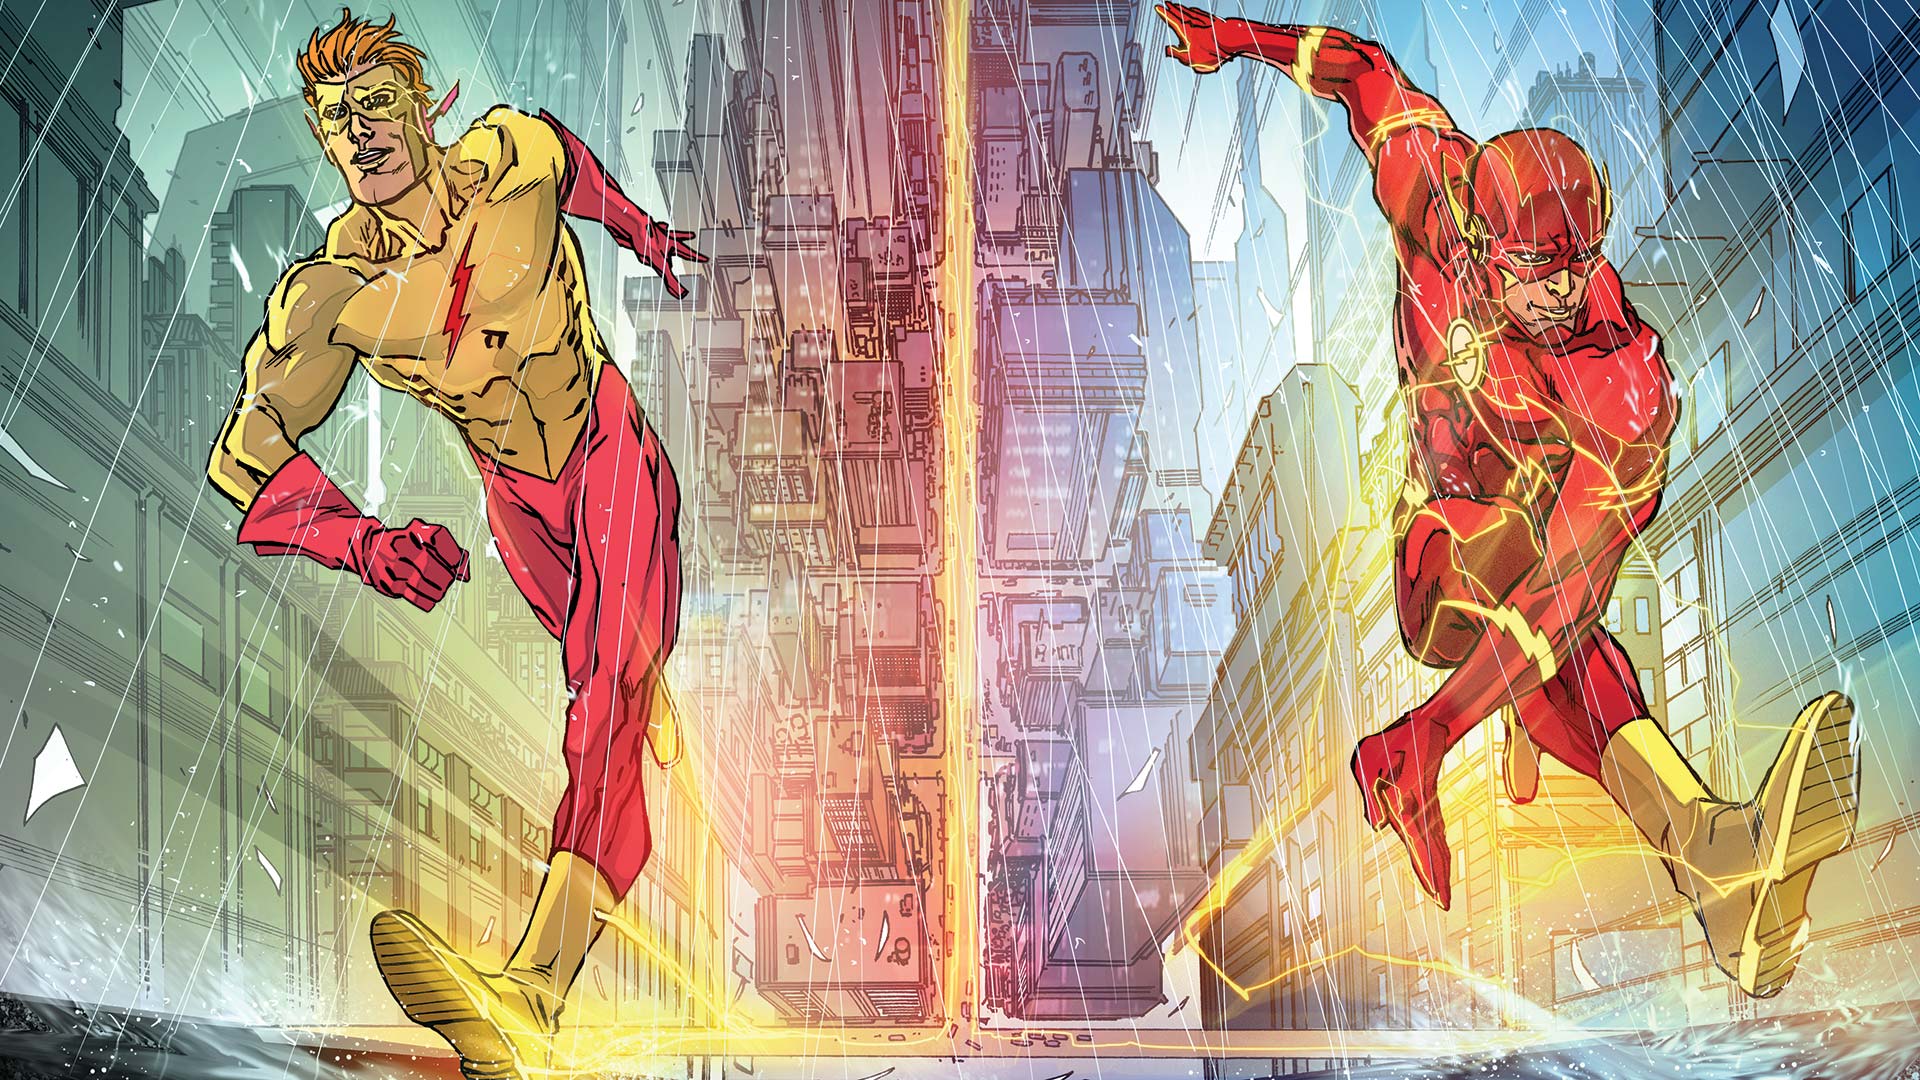 Relationship Roundup: Barry Allen and Wally West